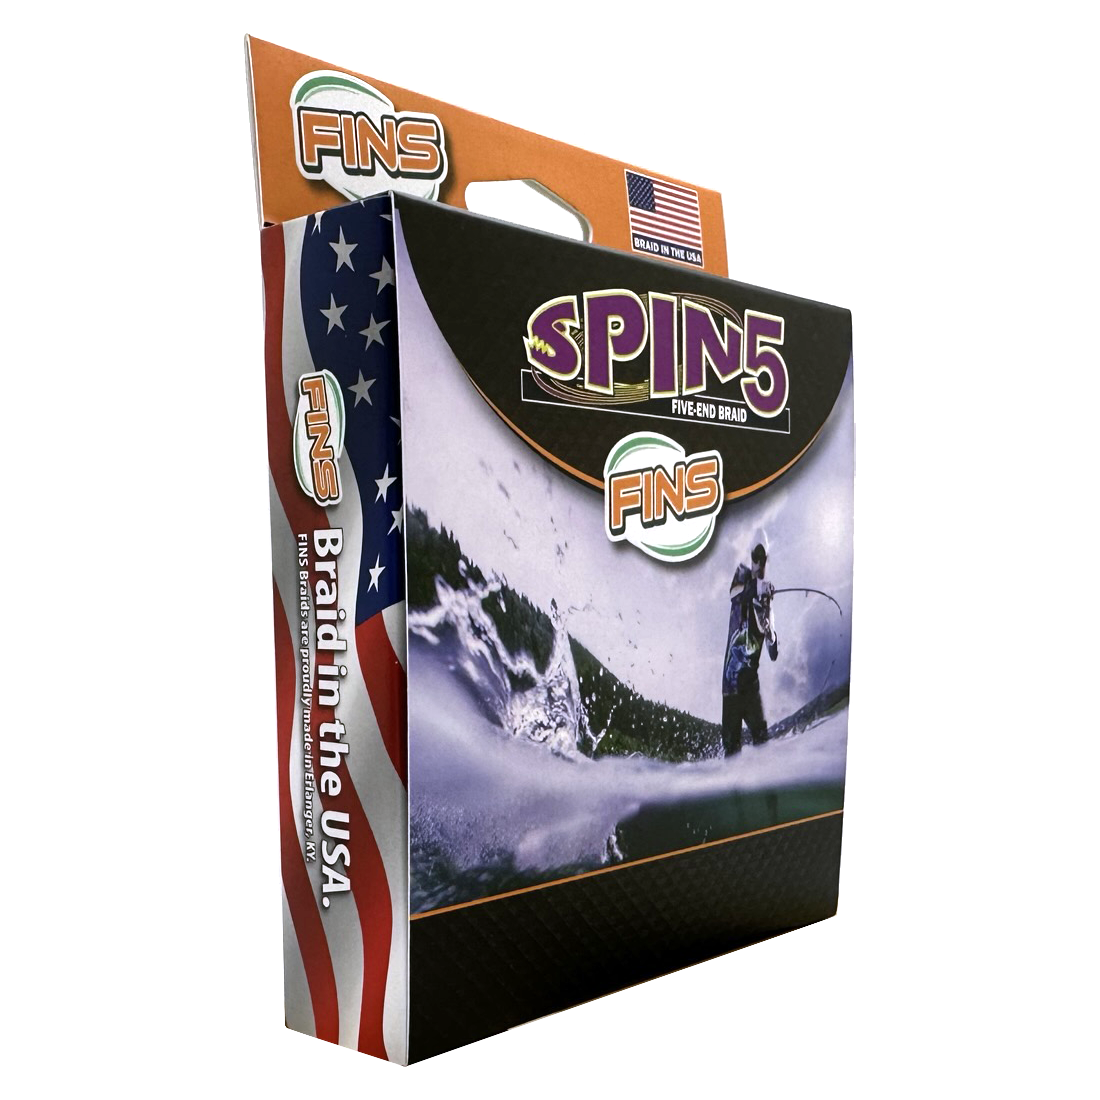 FINS Spin5 is constructed with a unique 5-end braid structure resulting in increased roundness over a 4-end braid pattern. Unlike inferior, stiff, imported braided lines, our FINS Spin5 has just the right amount of body that will ensure it pays off your reel smoothly and through guides without bounce for noticeably longer casts. 